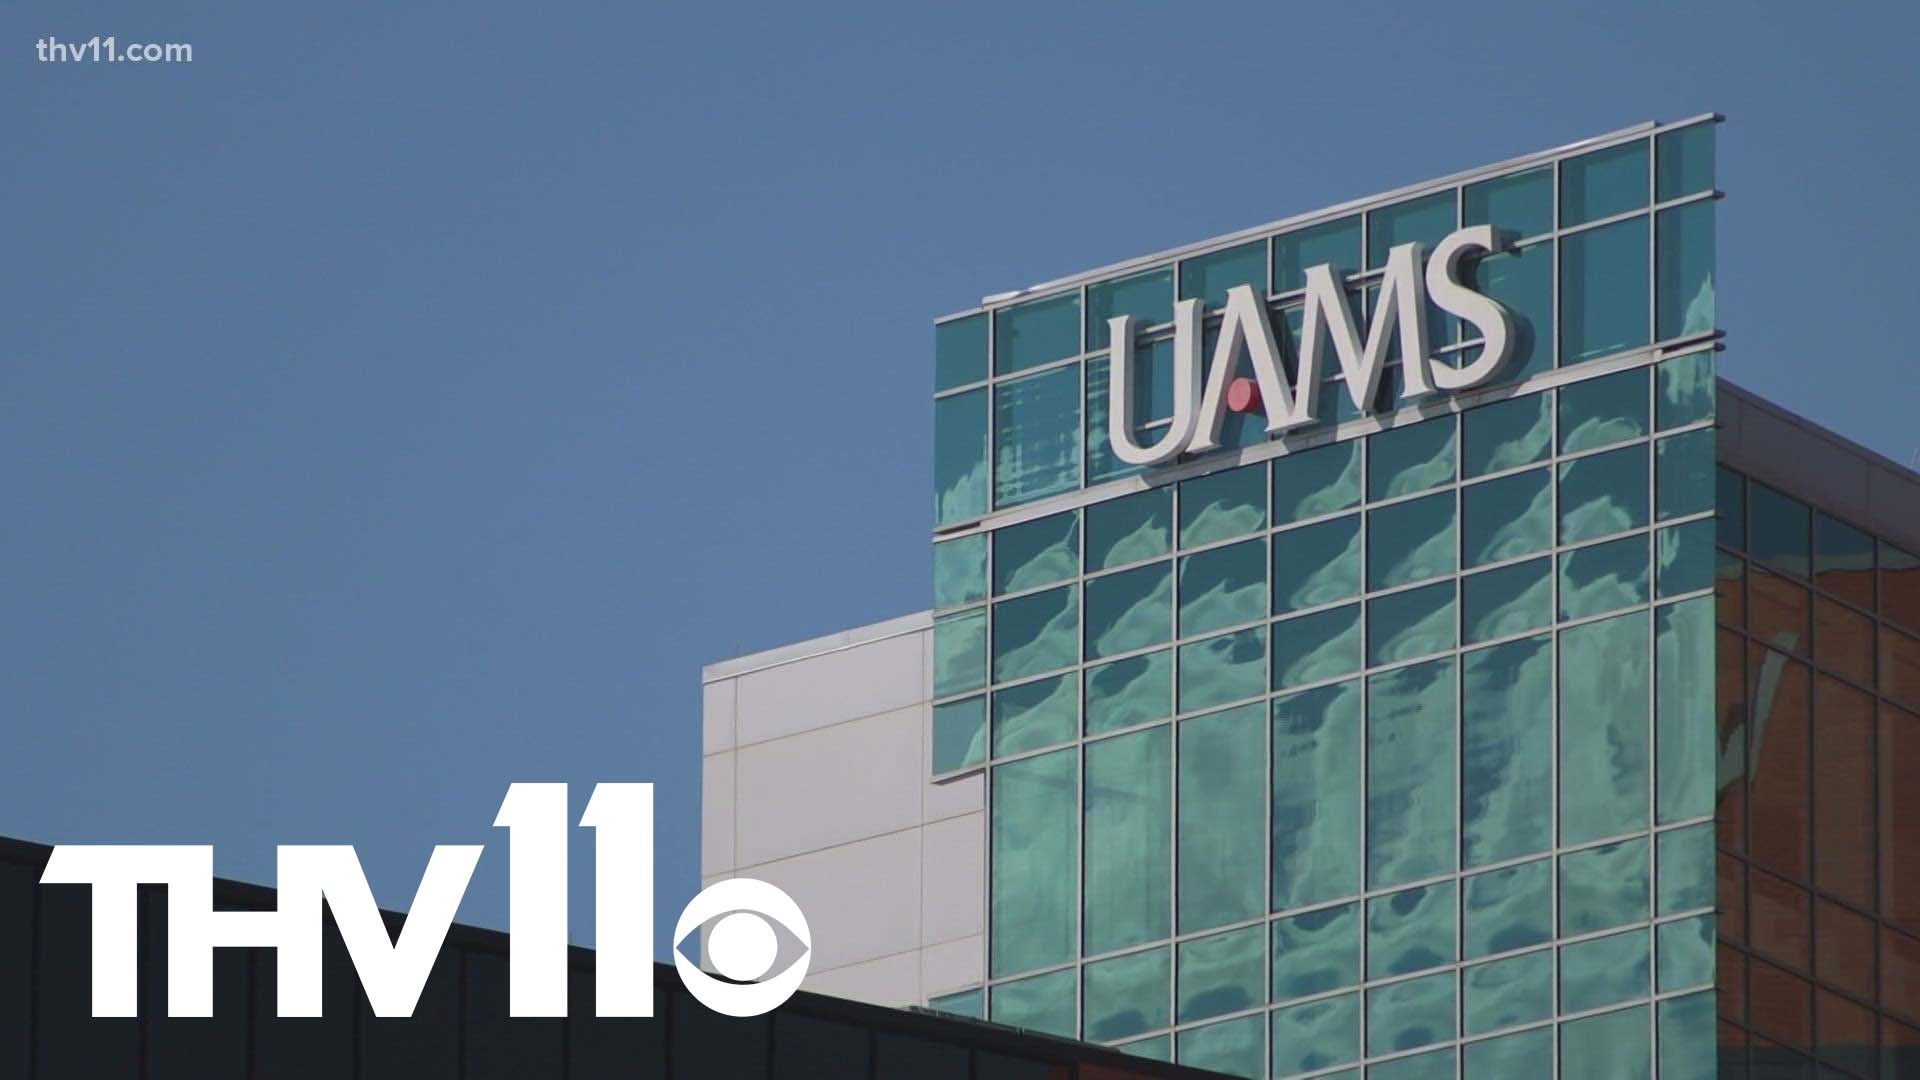 Months ago, UAMS researchers found a possible cause for long-haul COVID in patients. As cases decline around the state, many are again seeing lingering symptoms.